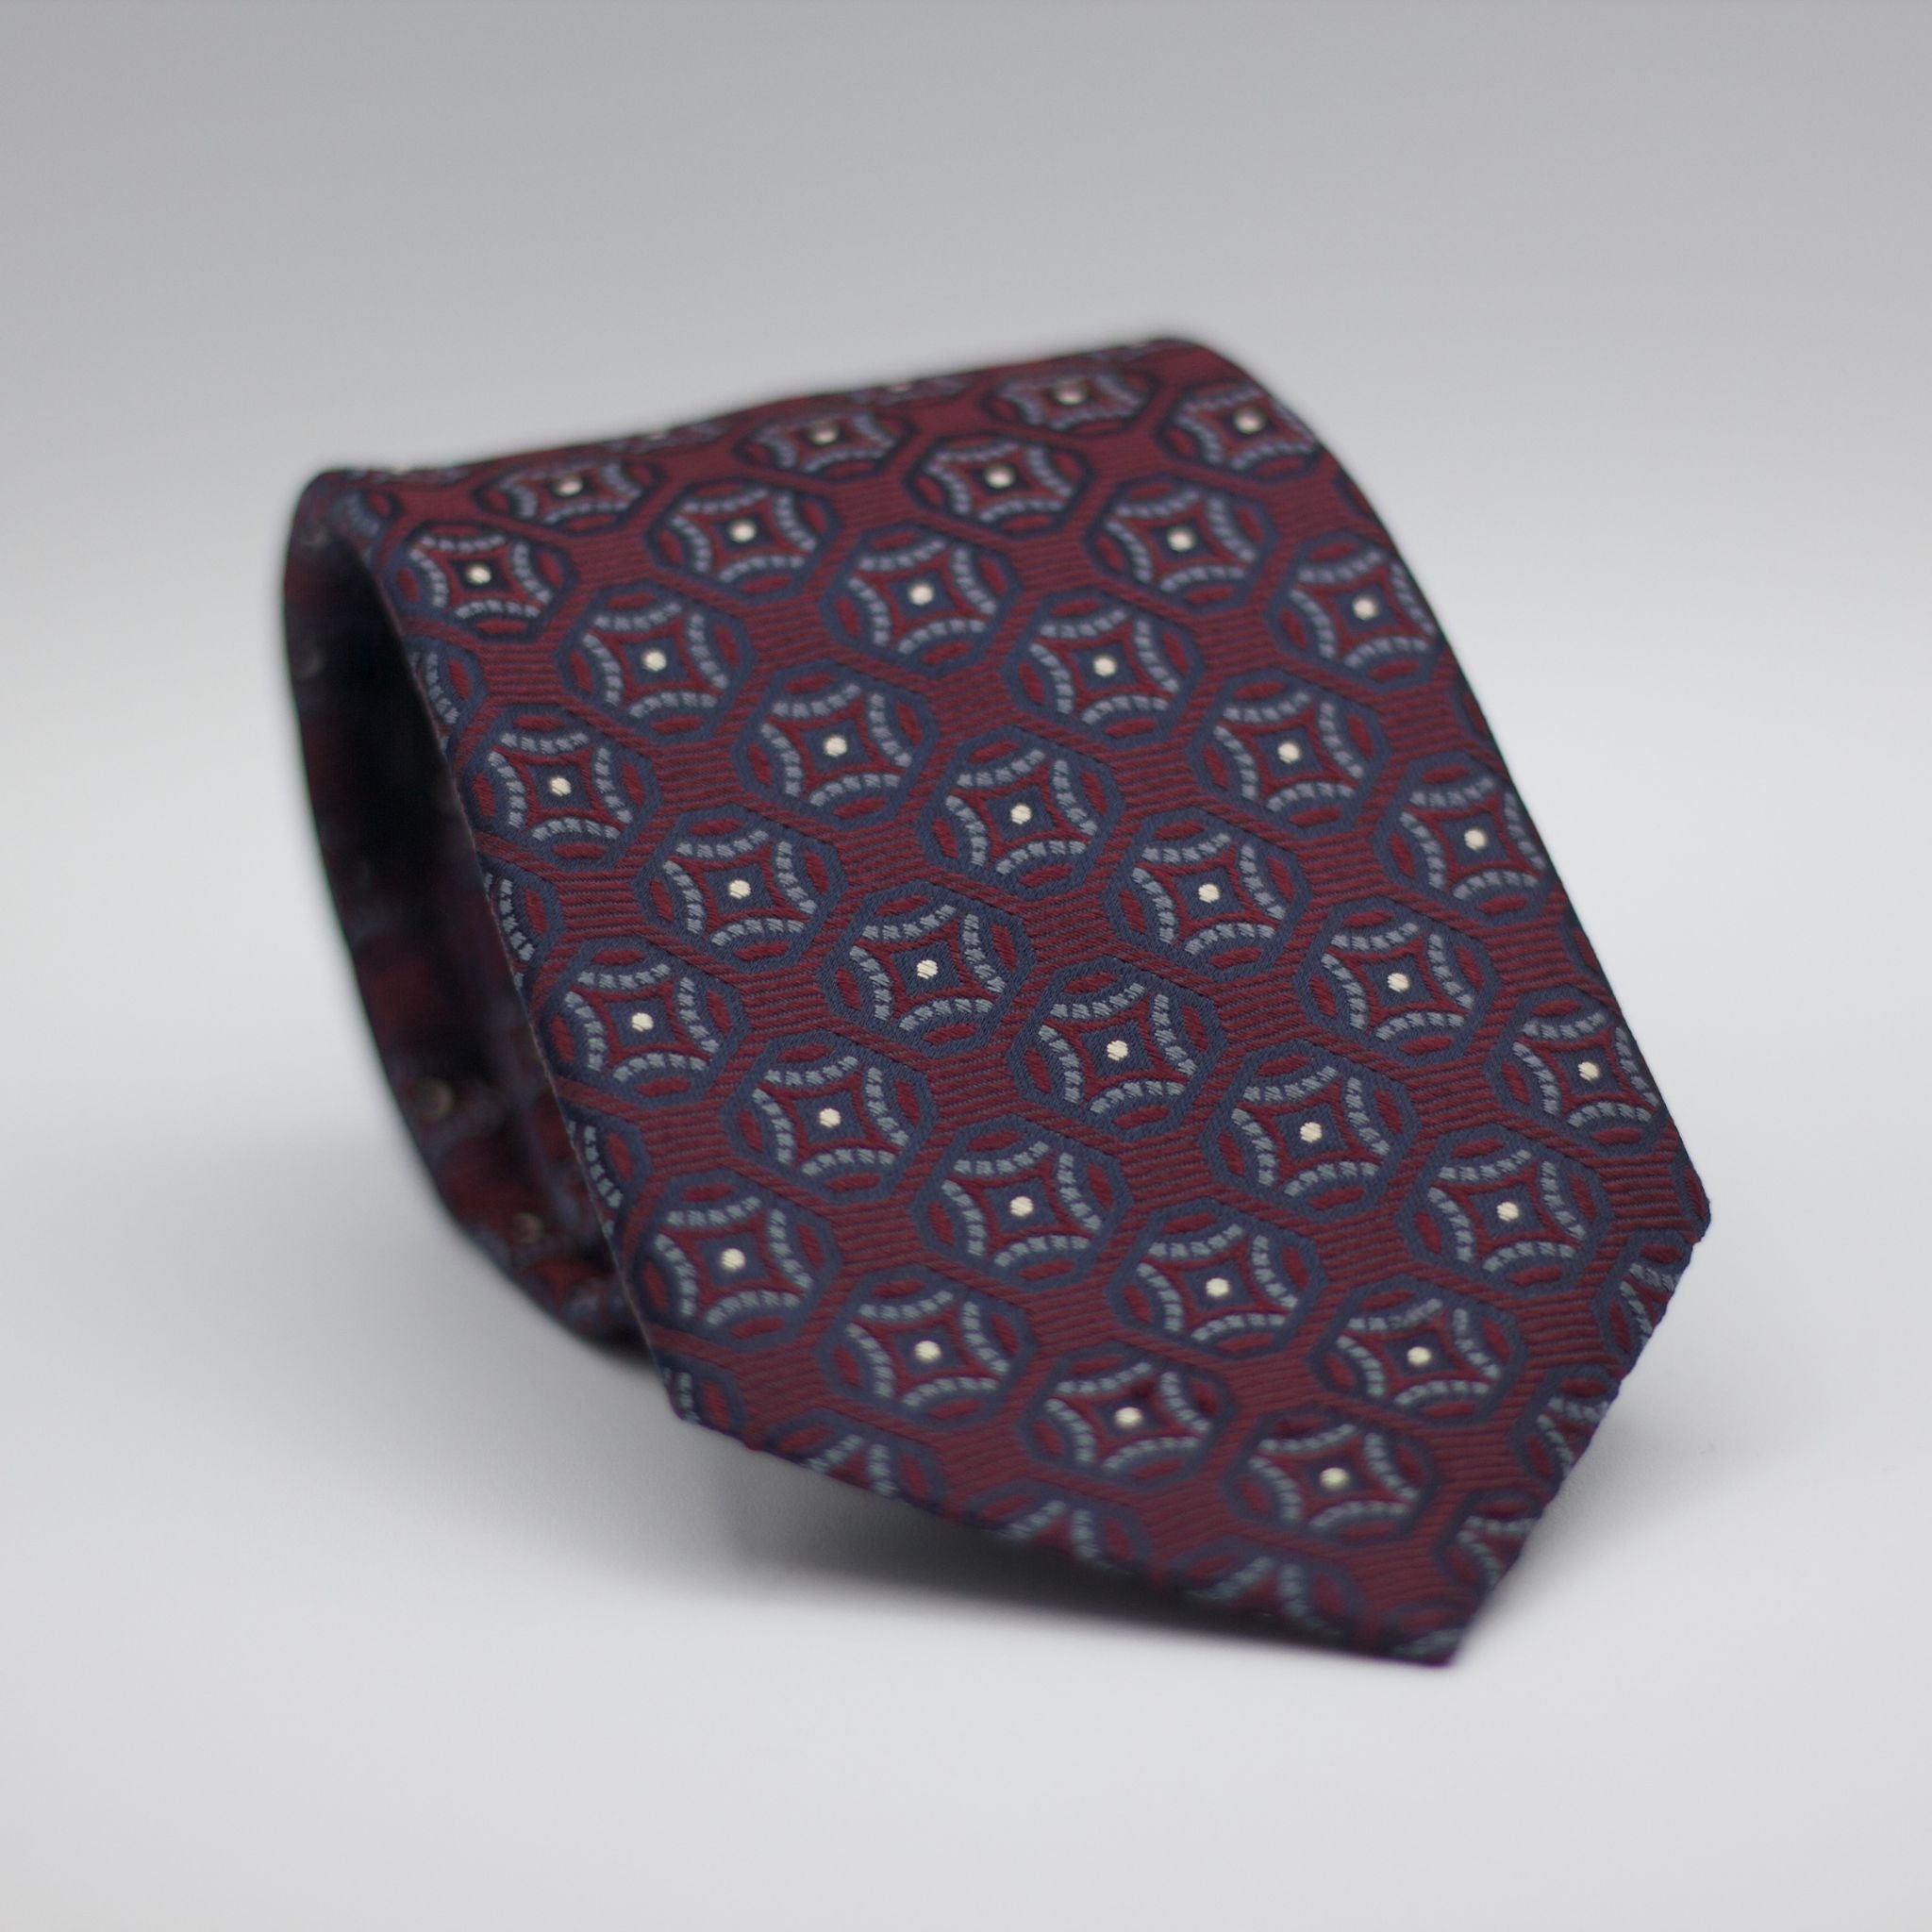 Holliday & Brown for Cruciani & Bella 100% Woven Jacquard Silk Tipped Burgundy with Grey and Blue Navy motif tie  Handmade in Italy 8 cm x 150 cm #6989